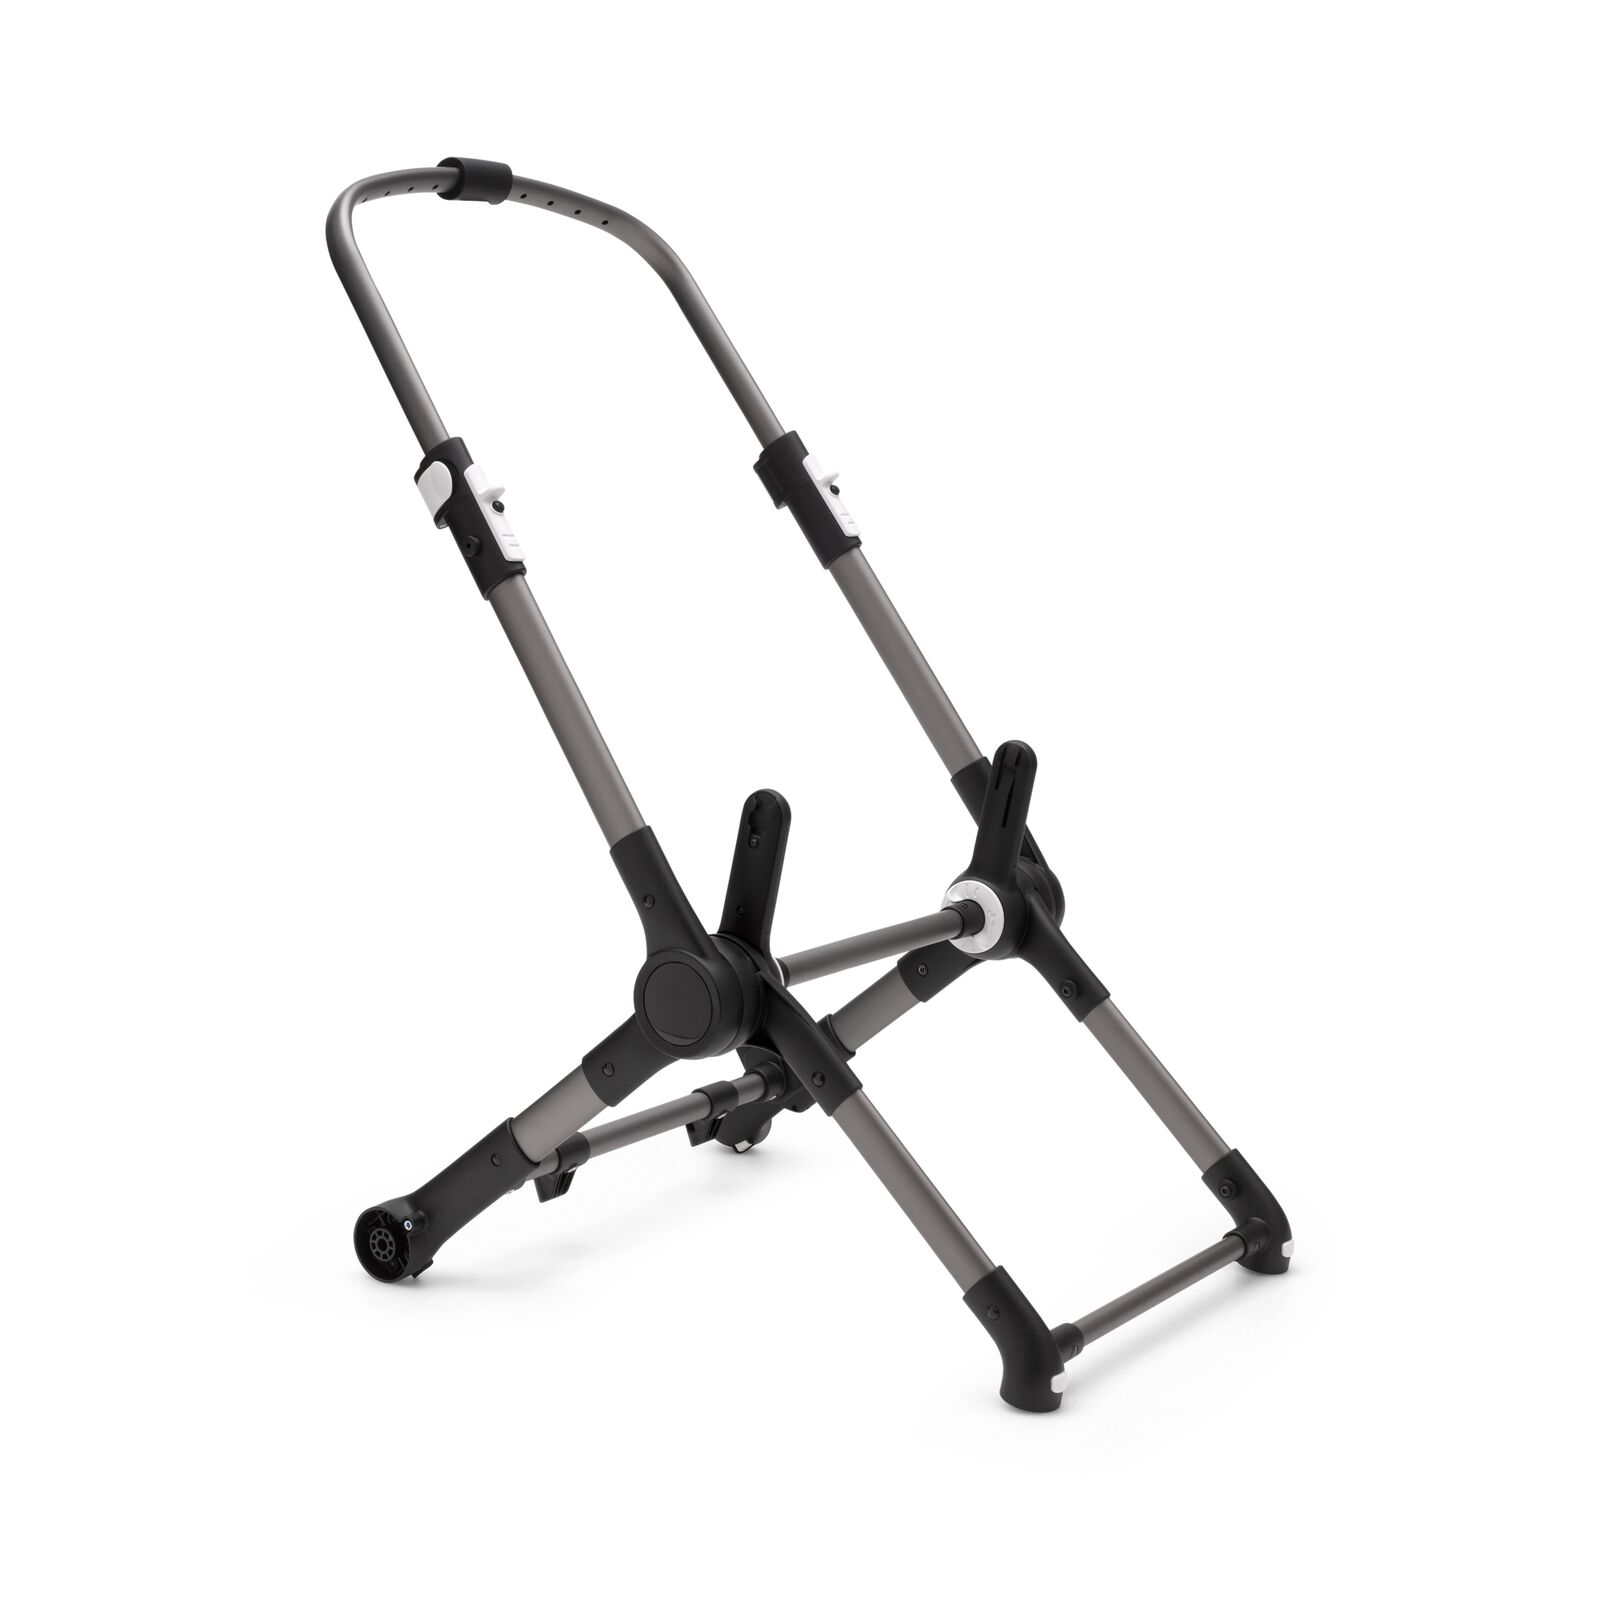 Bugaboo Fox 3 chassis - View 1